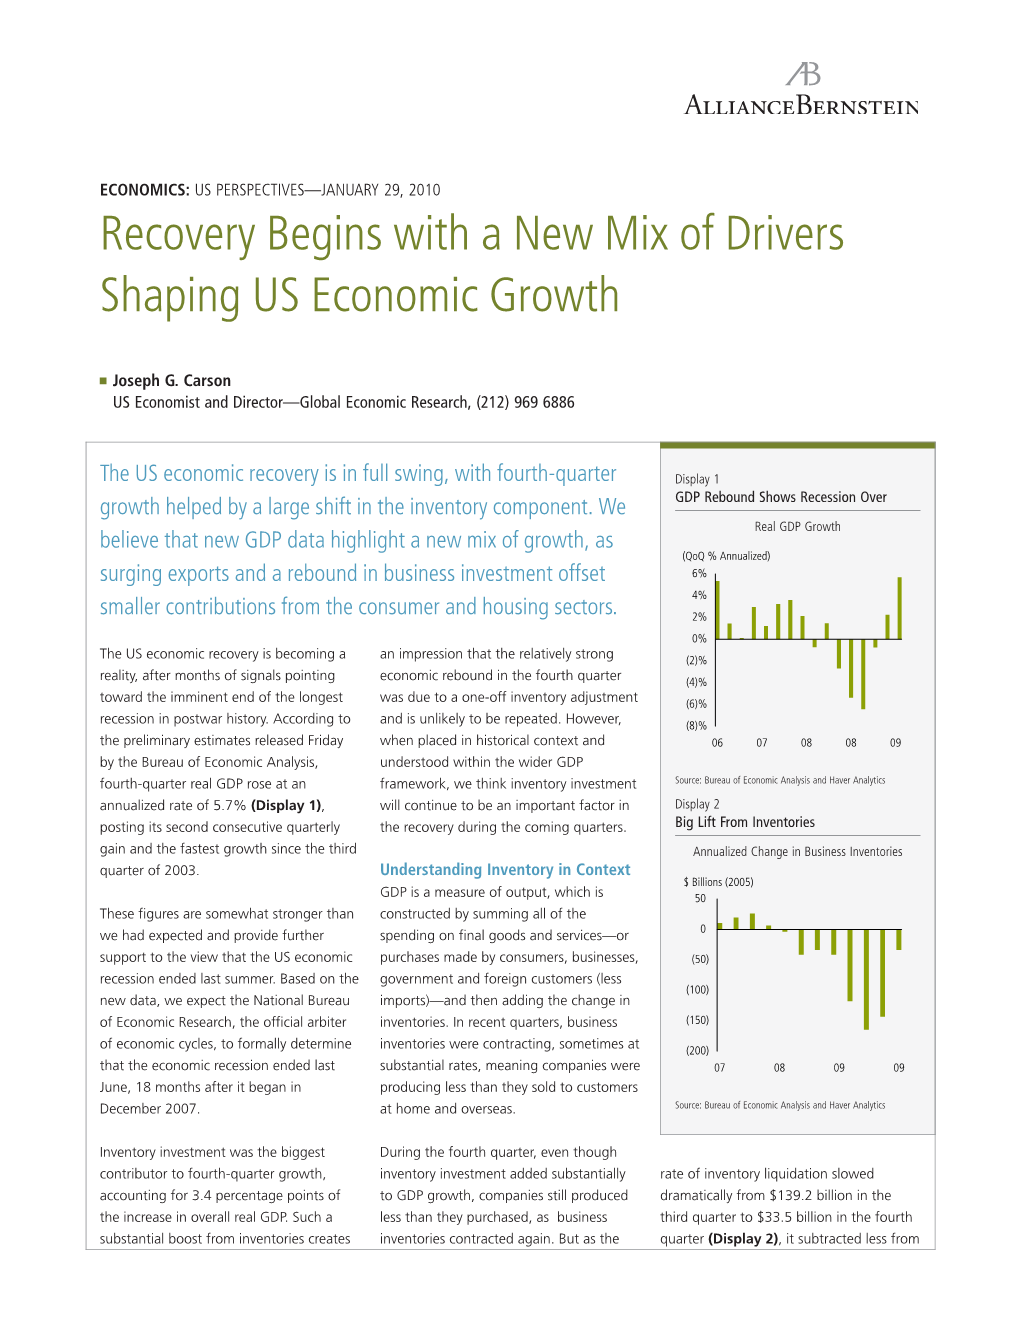 Recovery Begins with a New Mix of Drivers Shaping US Economic Growth